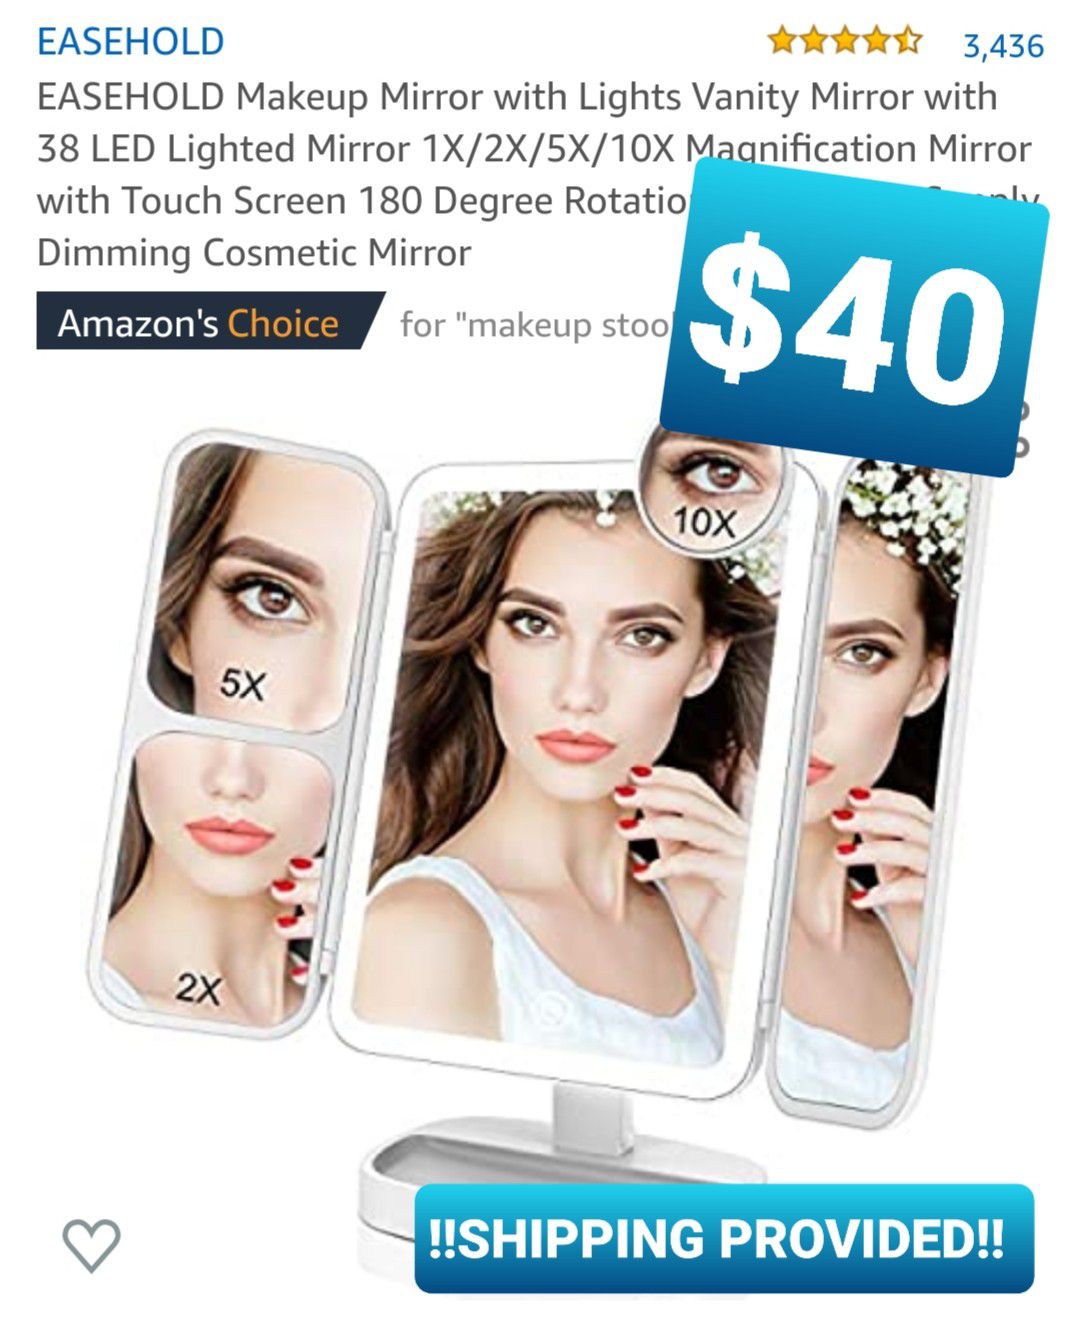 EASEHOLD Makeup Mirror with Lights Vanity Mirror with 38 LED Lighted Mirror 1X/2X/5X/10X Magnification, espejo con luz